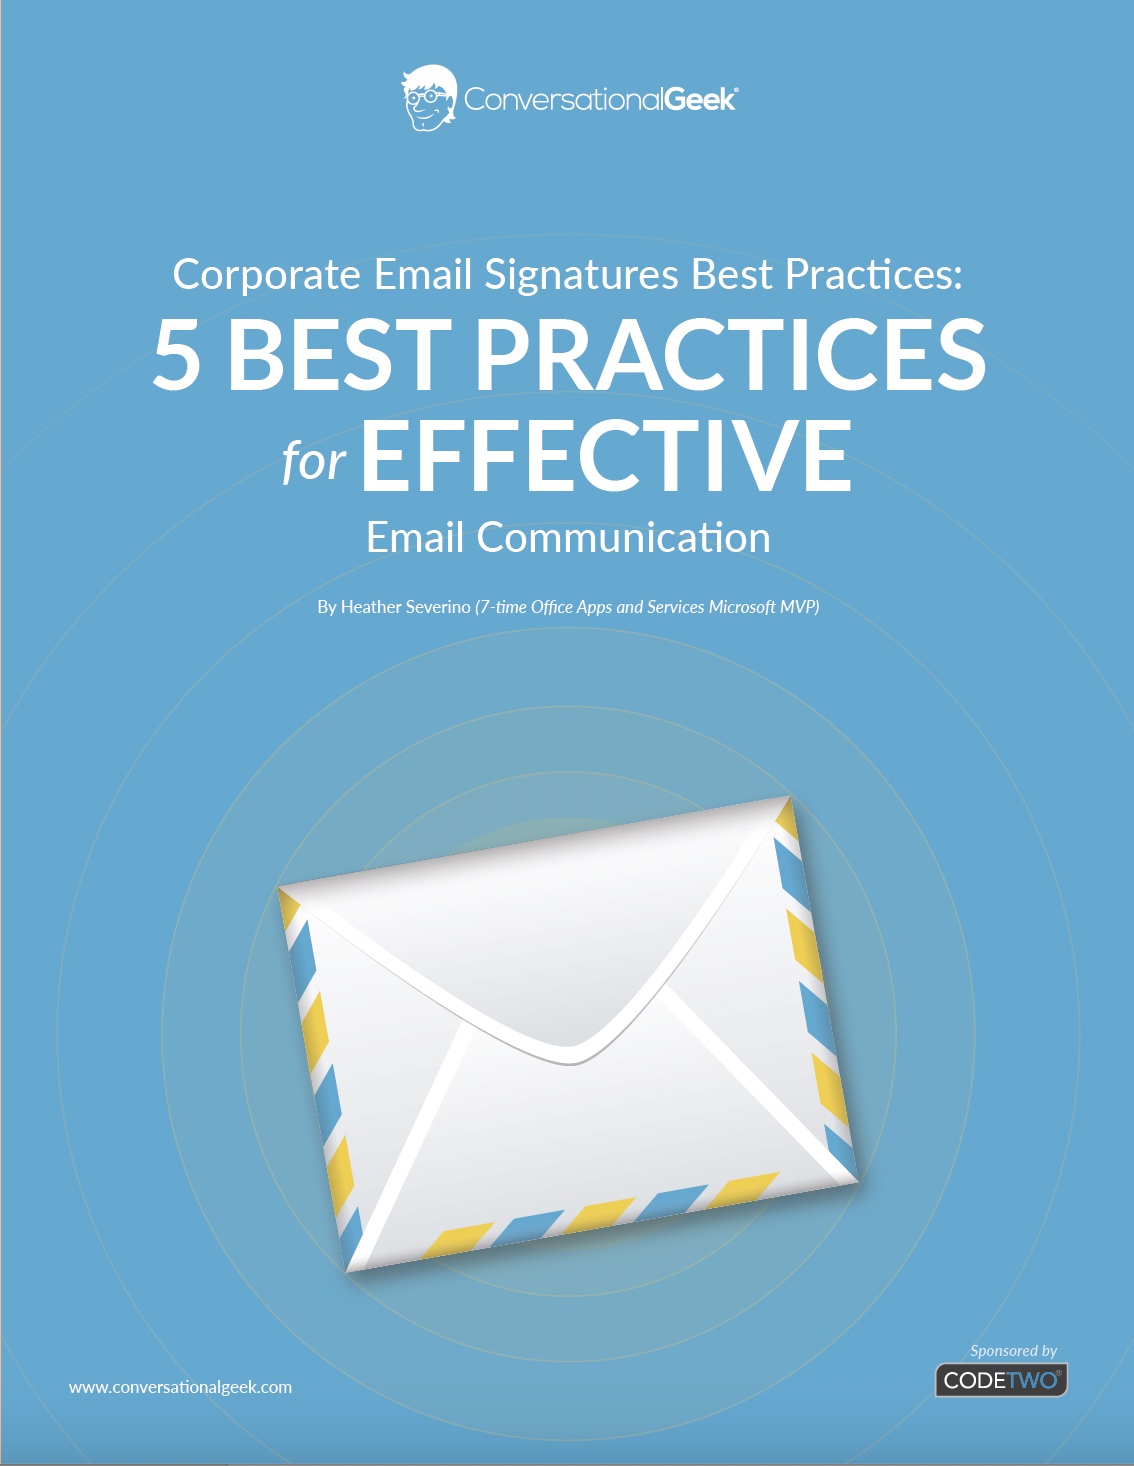 Five Best Practices for Effective Email Communication